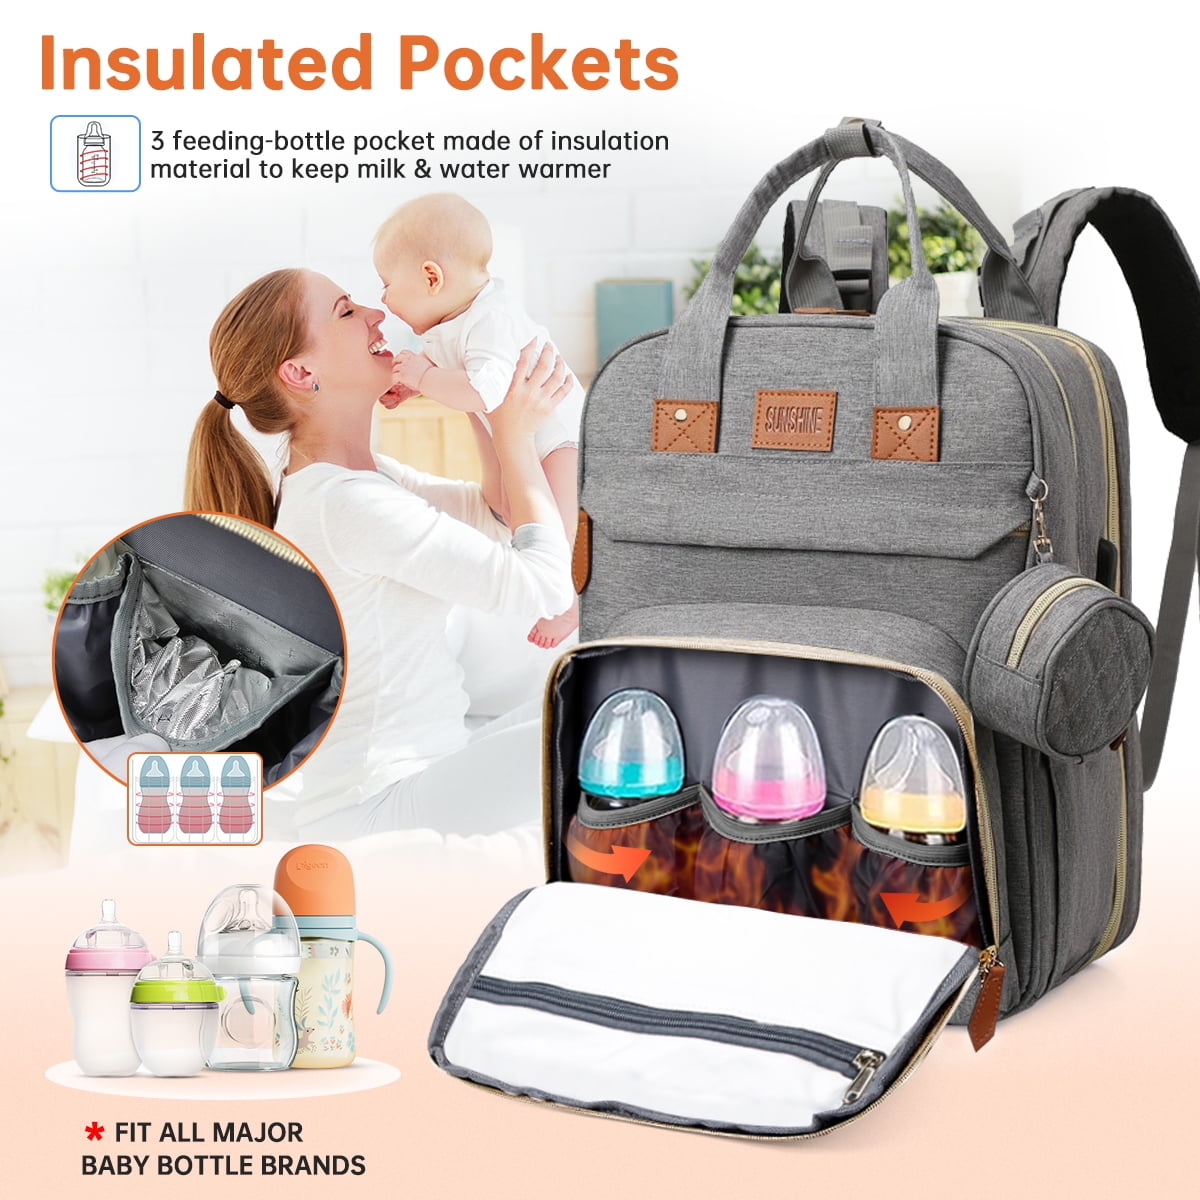  Ticent Diaper Bag Backpack Multifunction Travel Back Pack  Large Maternity Nappy Bag Baby Changing Bags with Stroller Straps,  Waterproof and Stylish : Baby